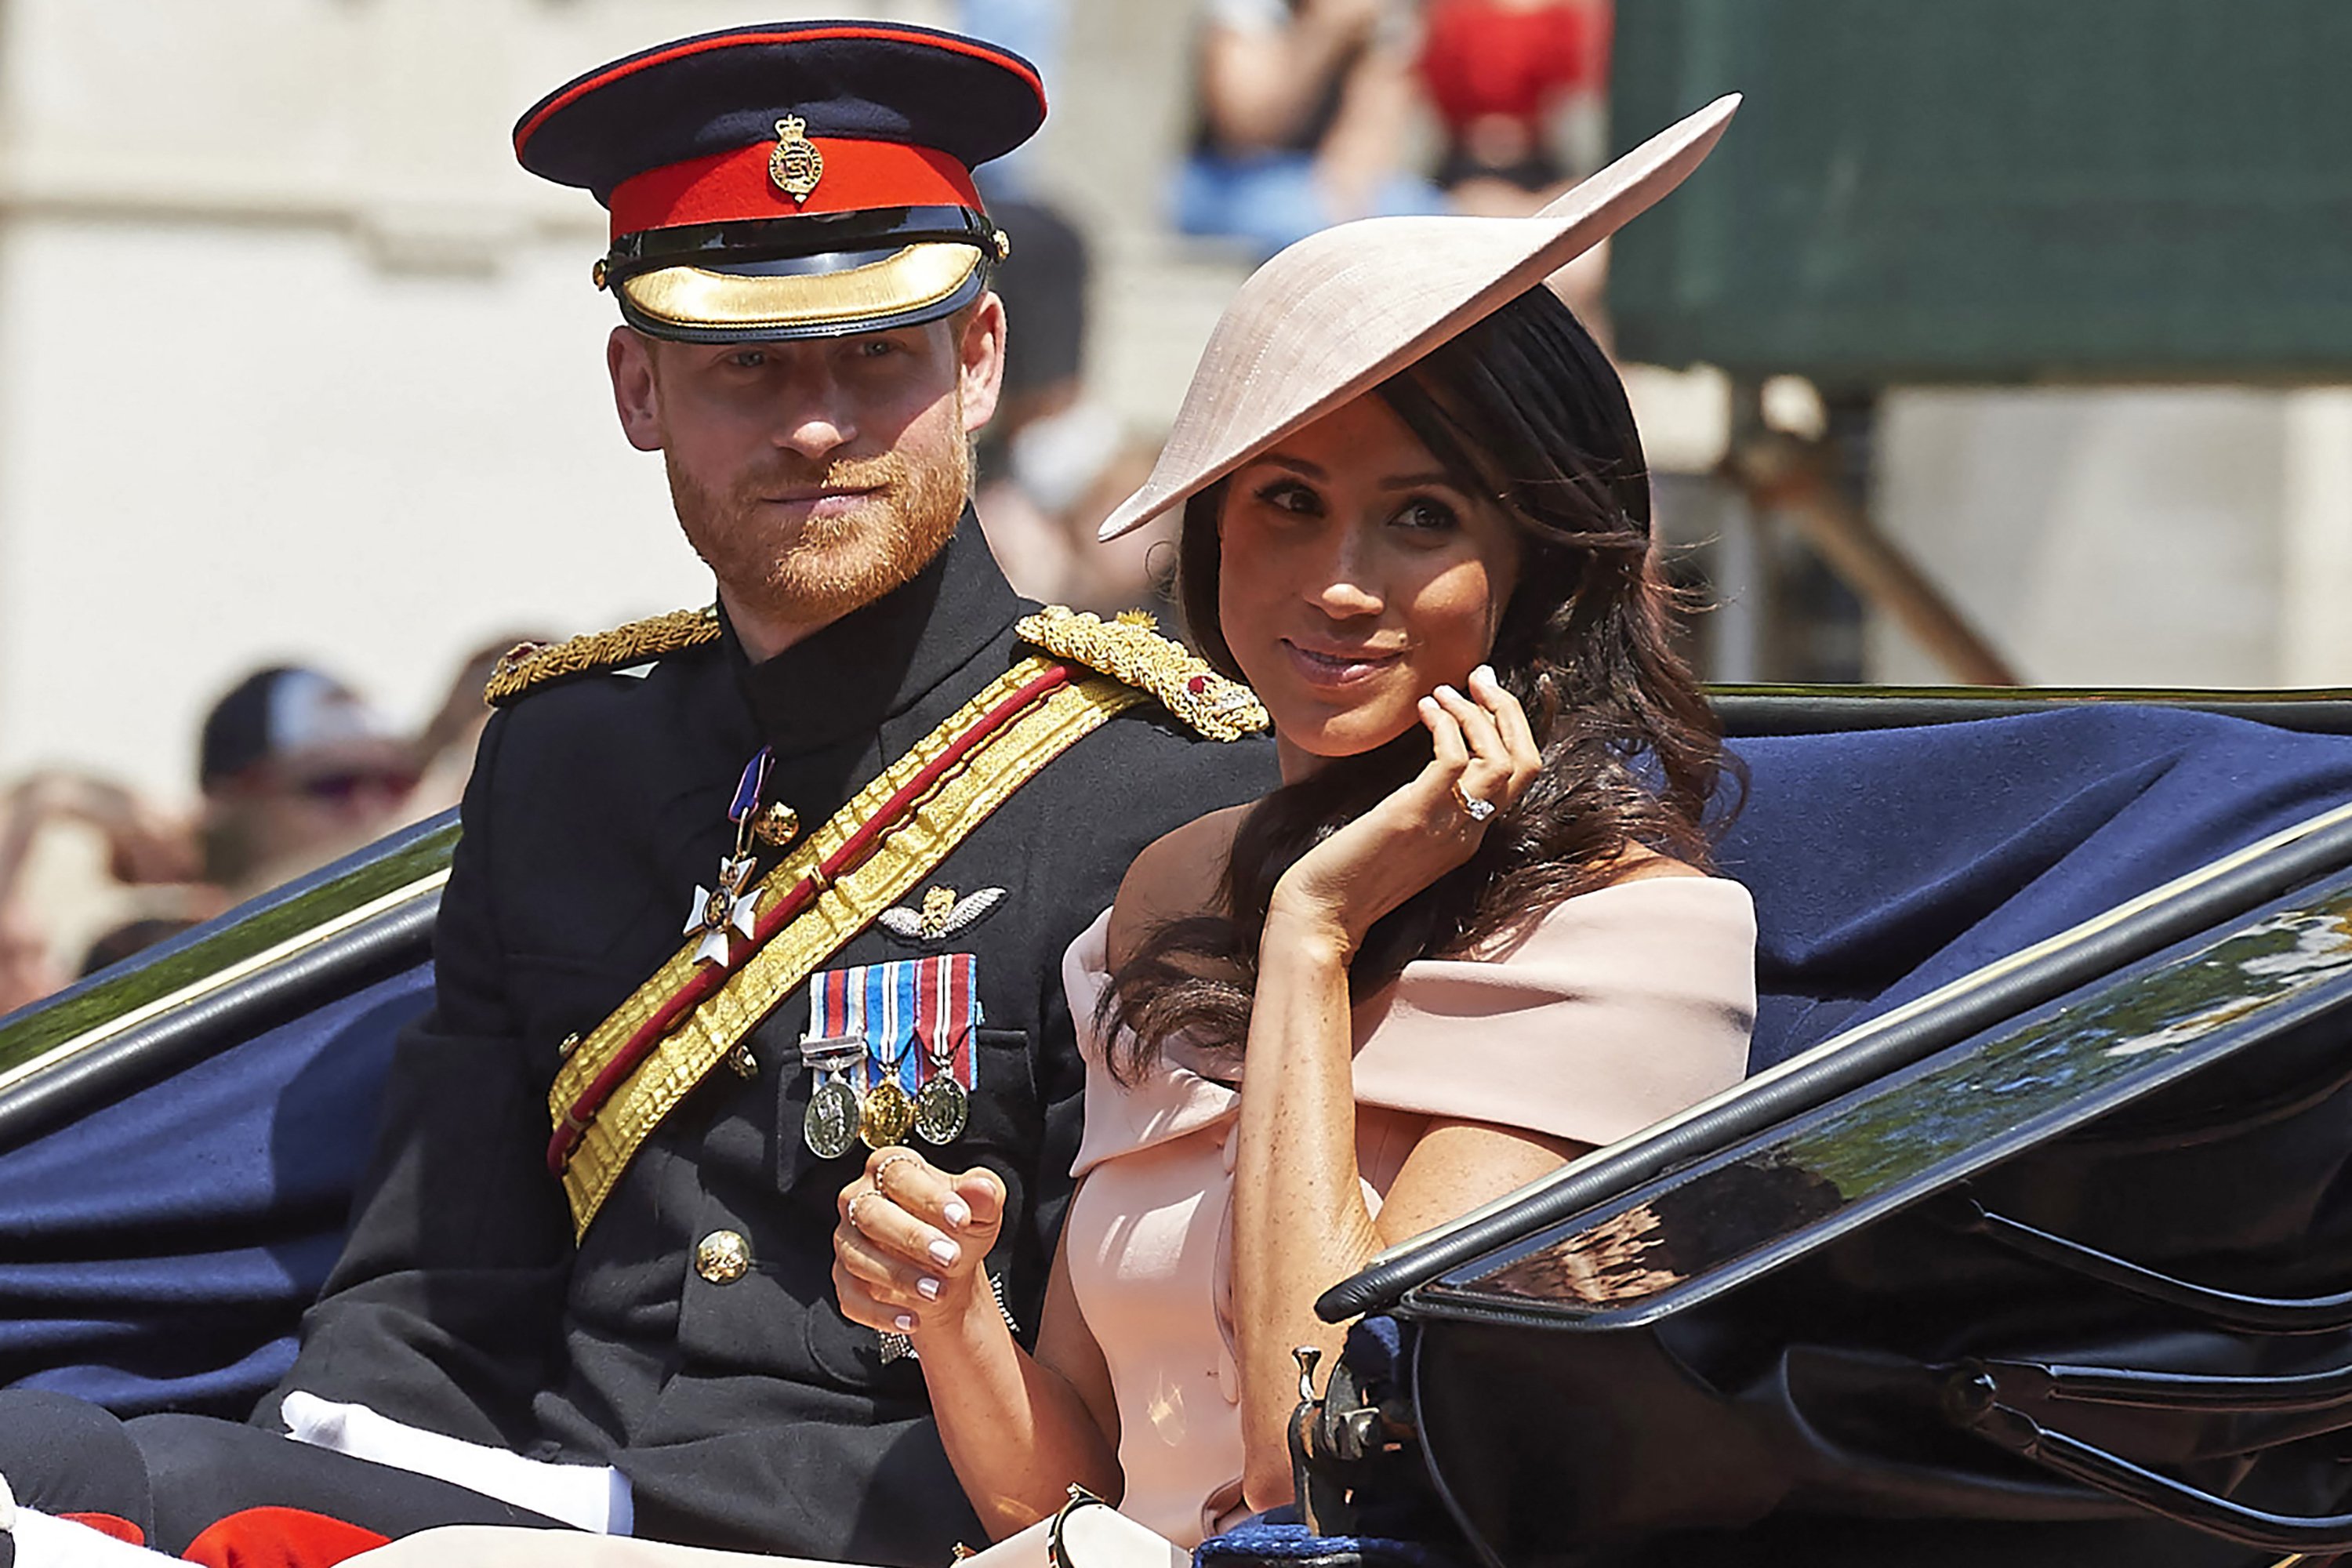 Prince Harry and Duchess Meghan return in a horse-drawn carriage after attending the Queen's Birthday Parade, "Trooping the Colour," in London on June 9, 2018 | Source: Getty Images